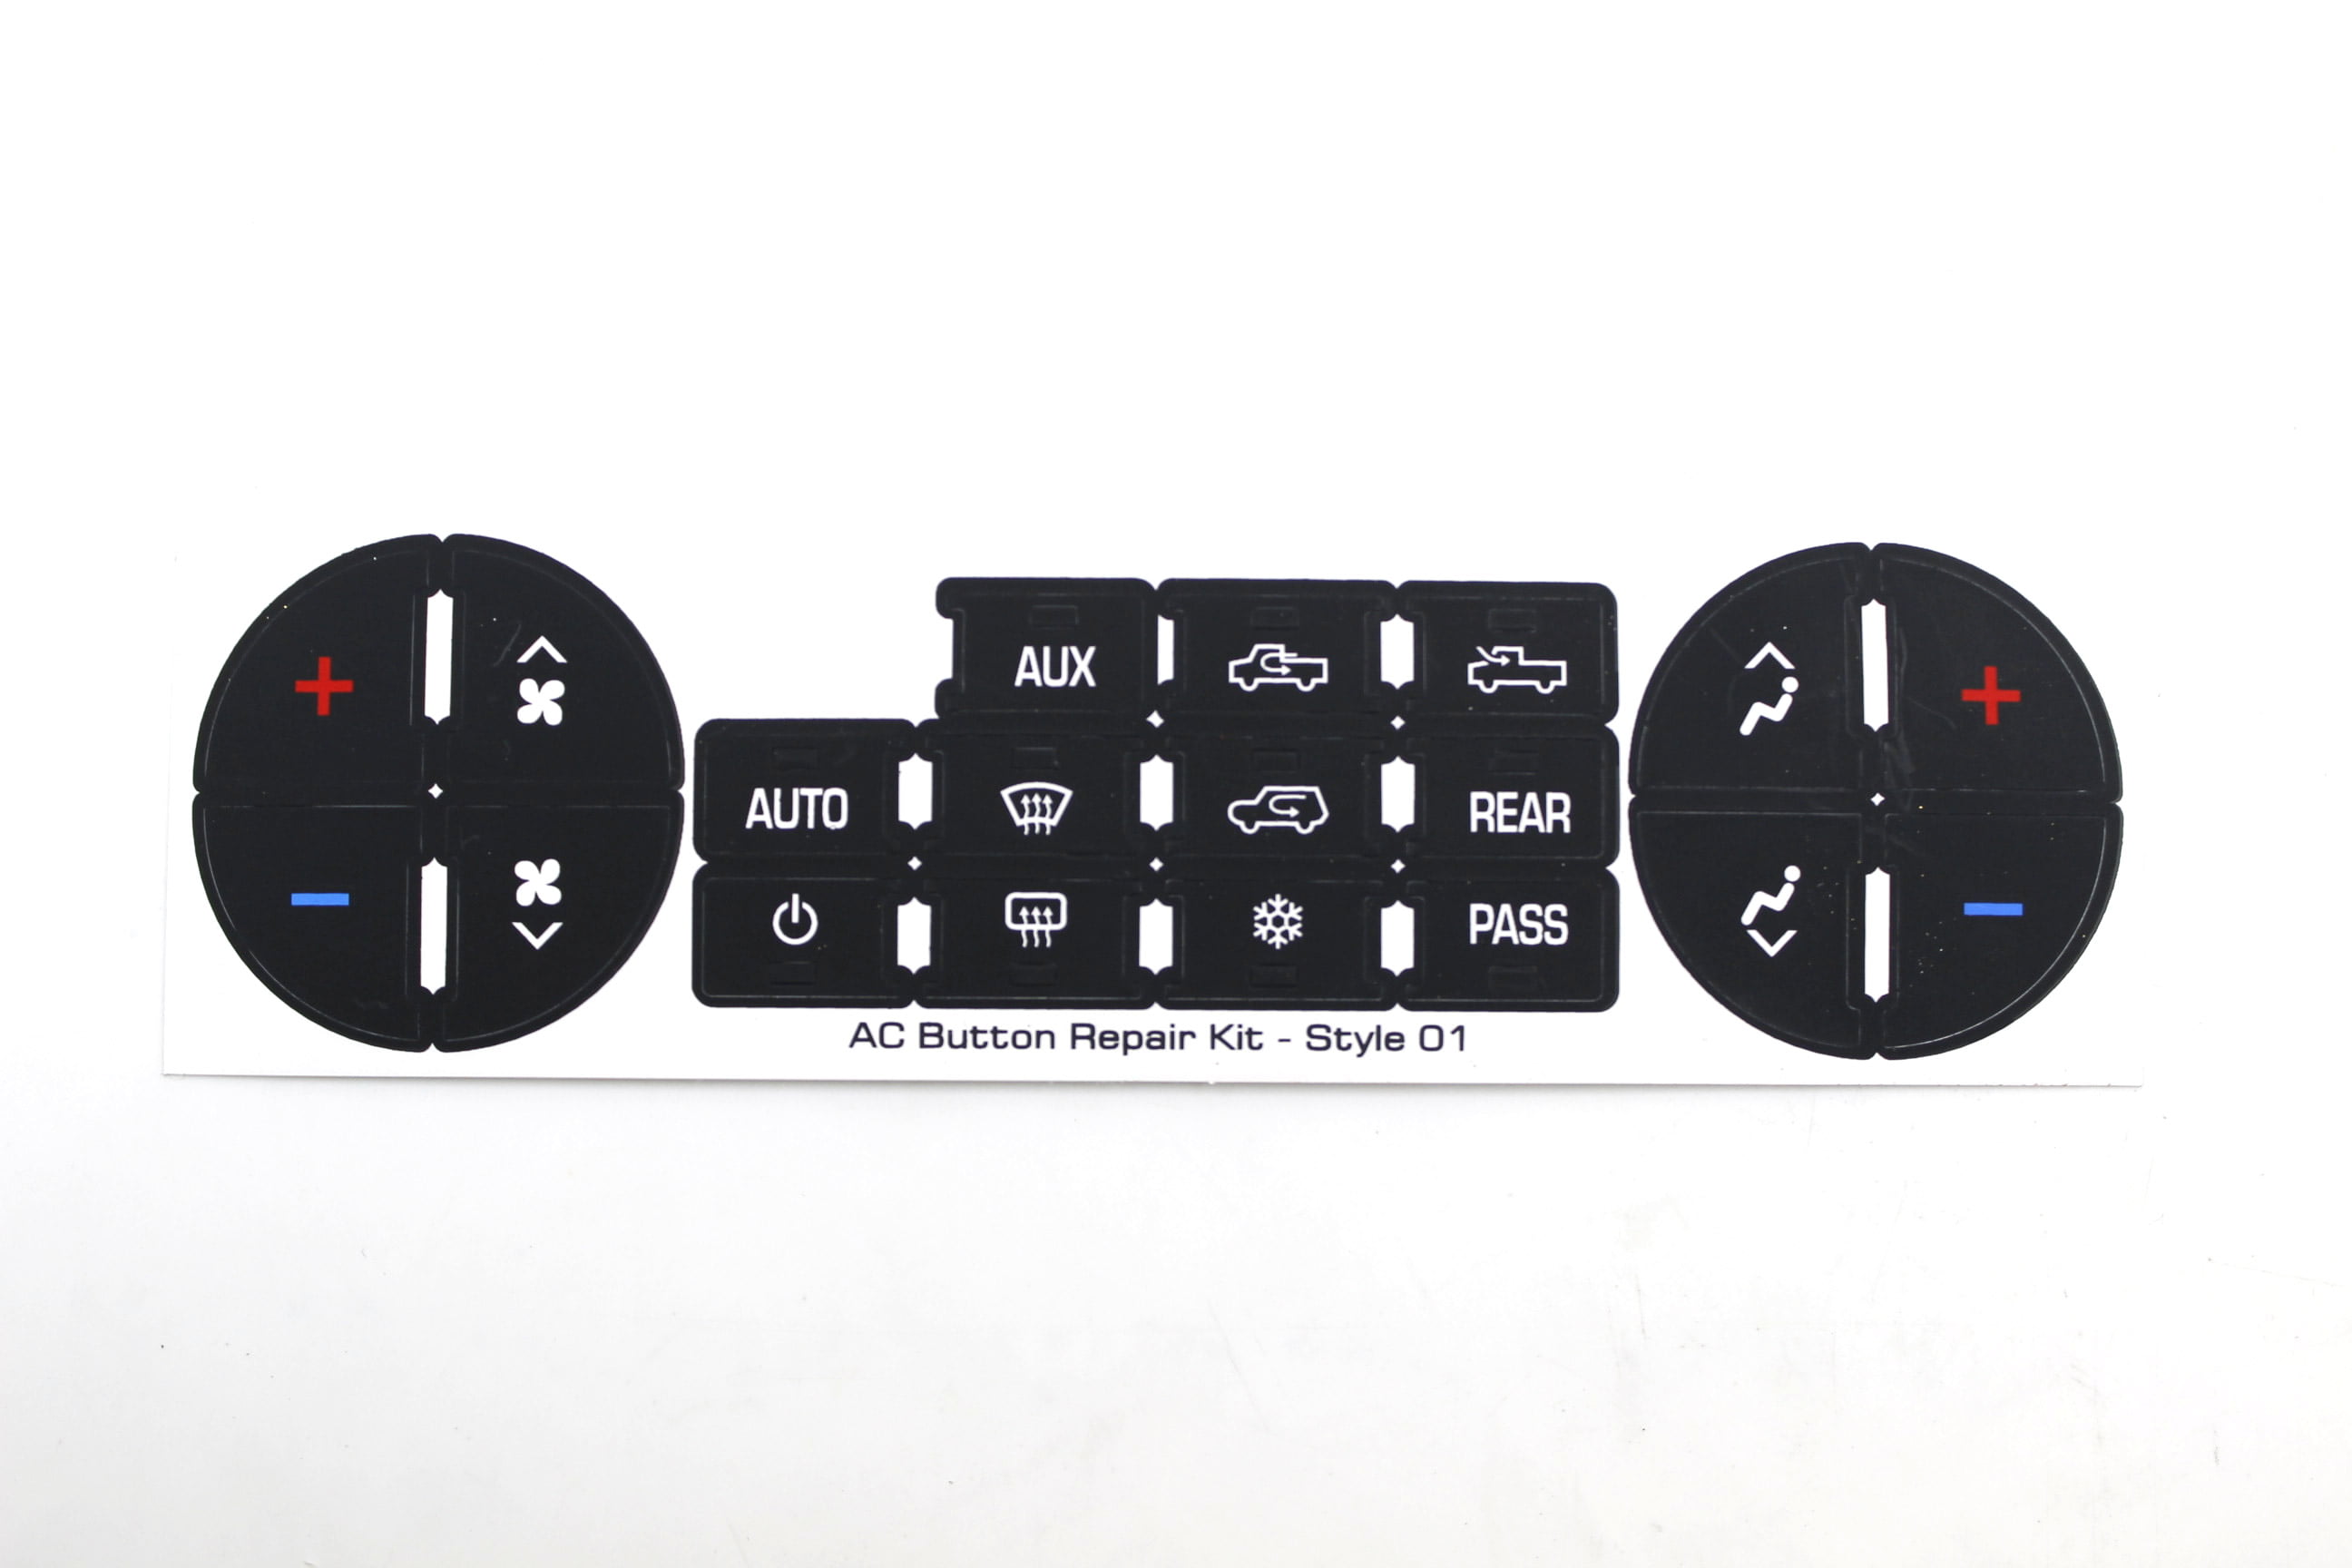 1 Pcs AC Dash Button Repair Kit Button Stickers for GM Tahoe Avalanche Silverado Yukon Denali Acadia Sierra&Buick Enclave-Fix Ruined Faded A/C Controls for OEM Genuine General Motors Factory Part 